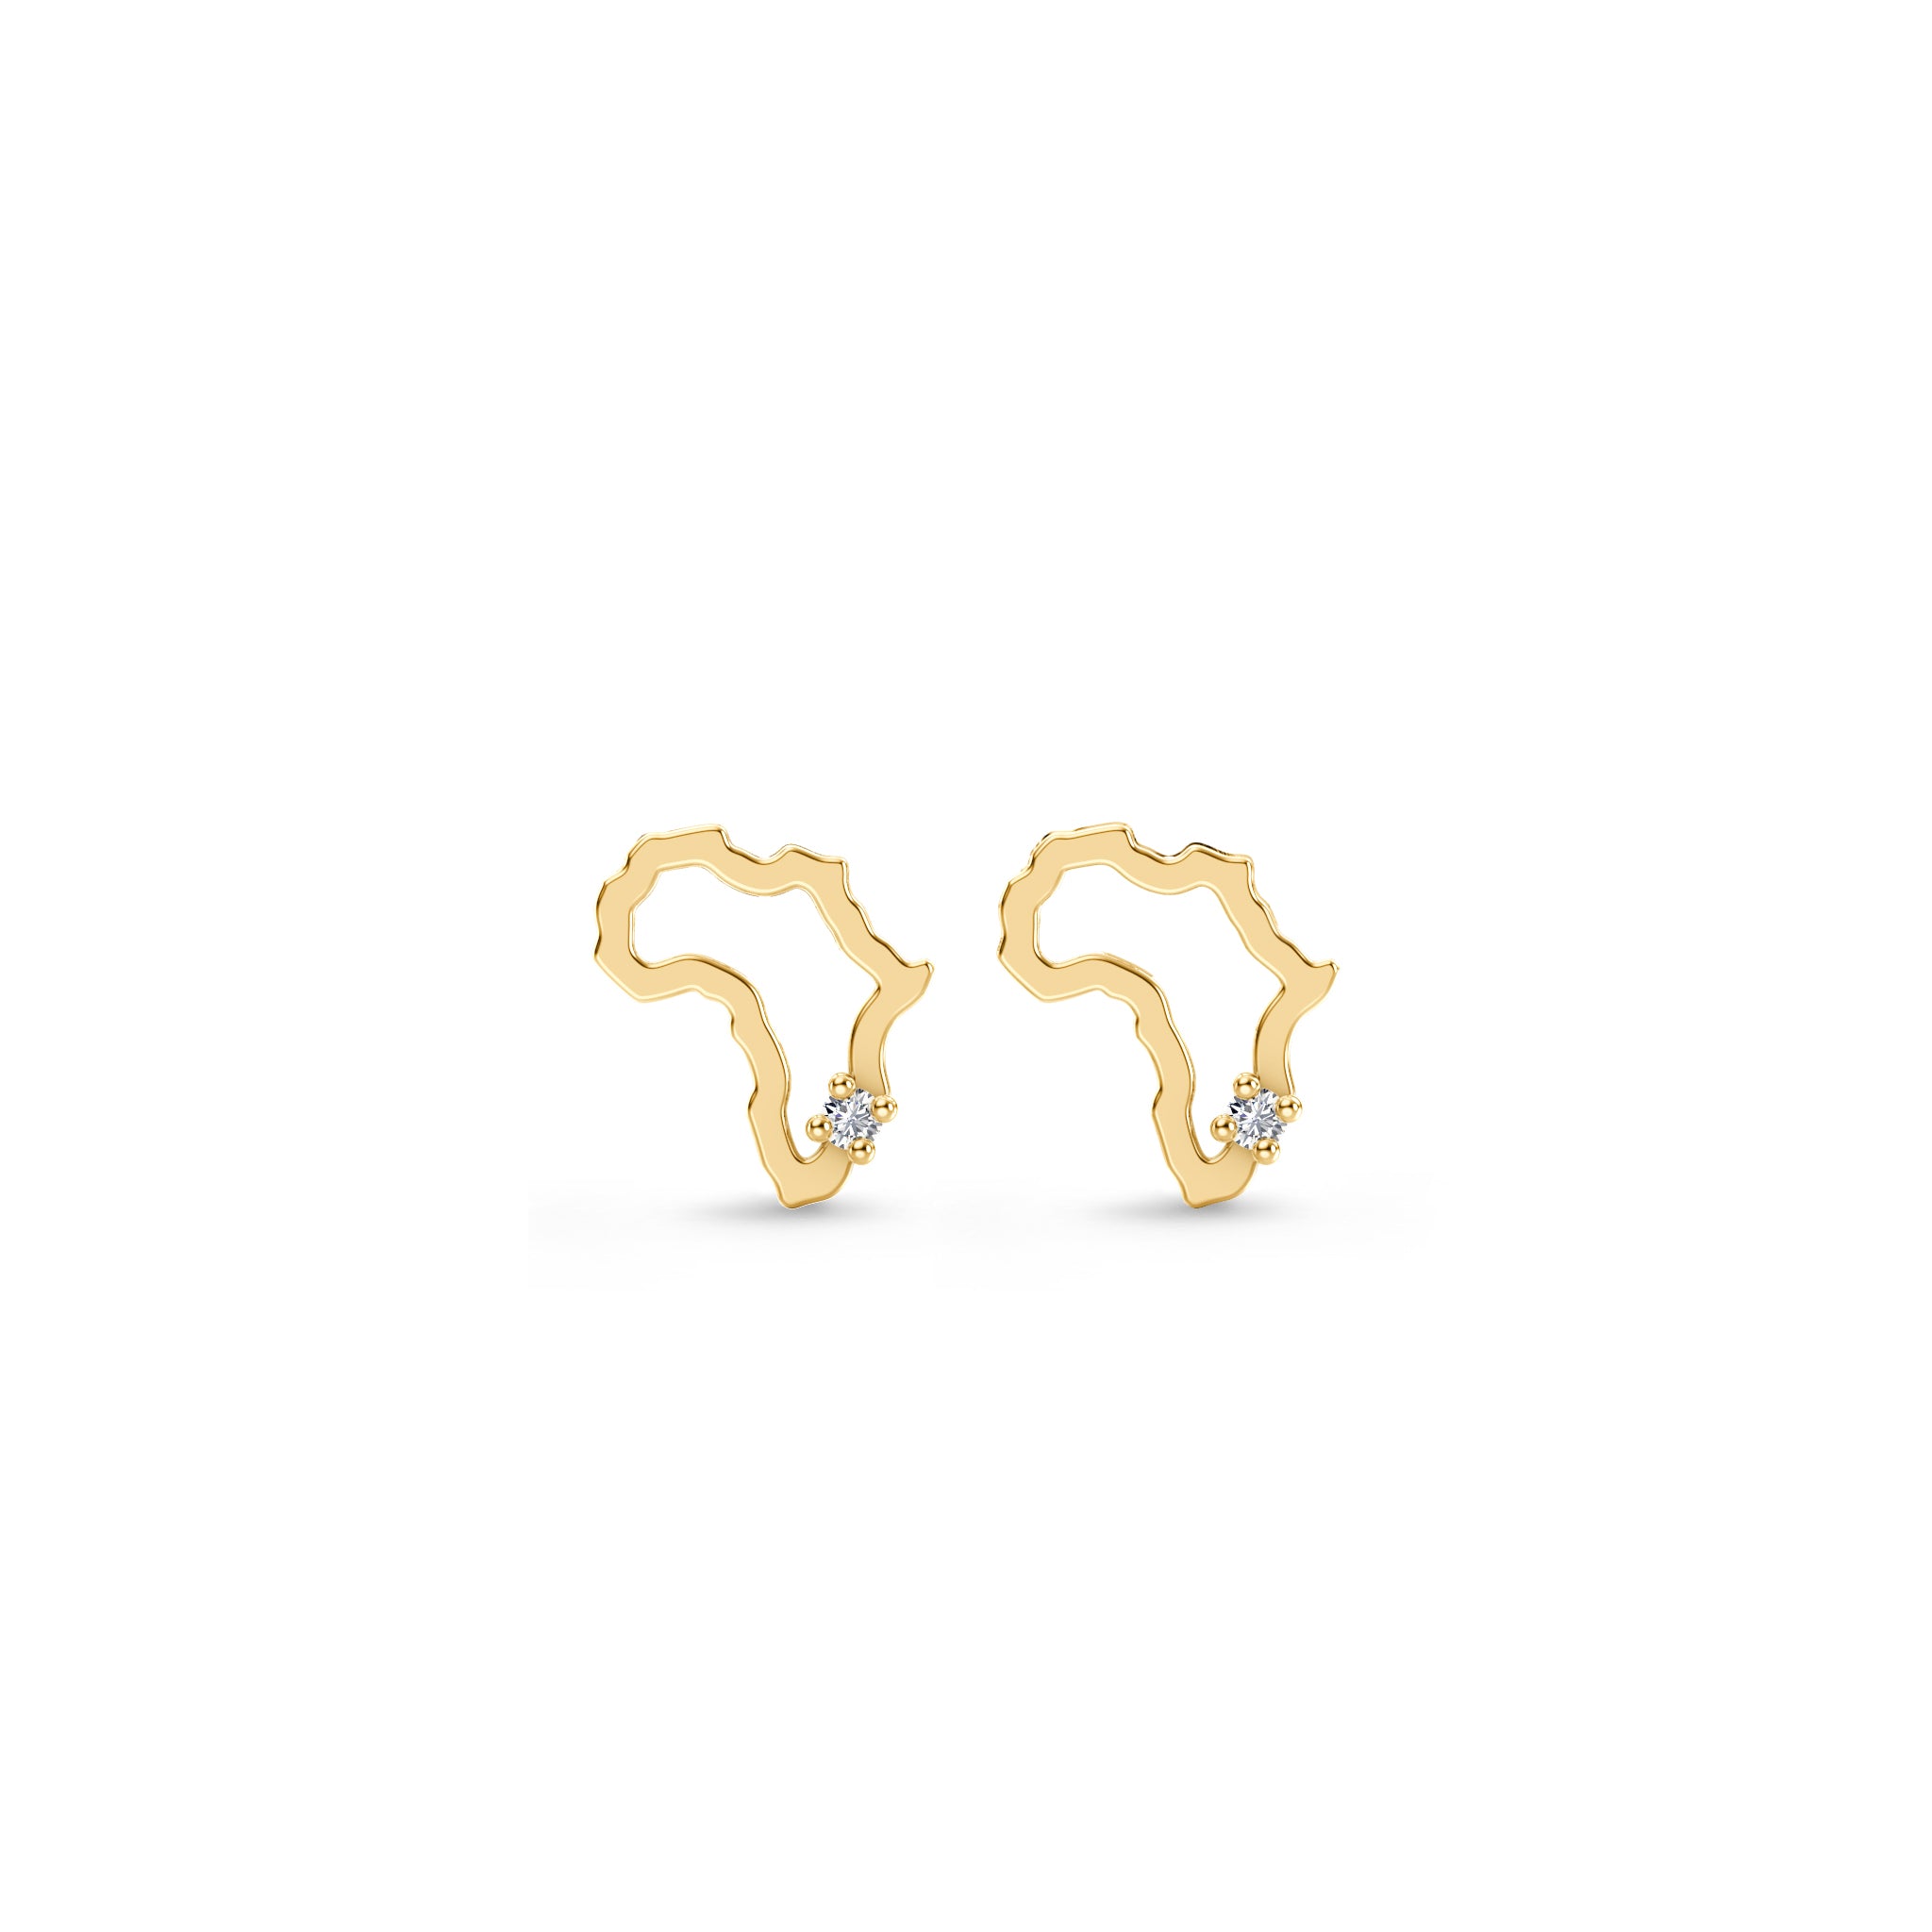 My Africa Petite Diamond Stud Earrings in 14K Yellow Gold Front View